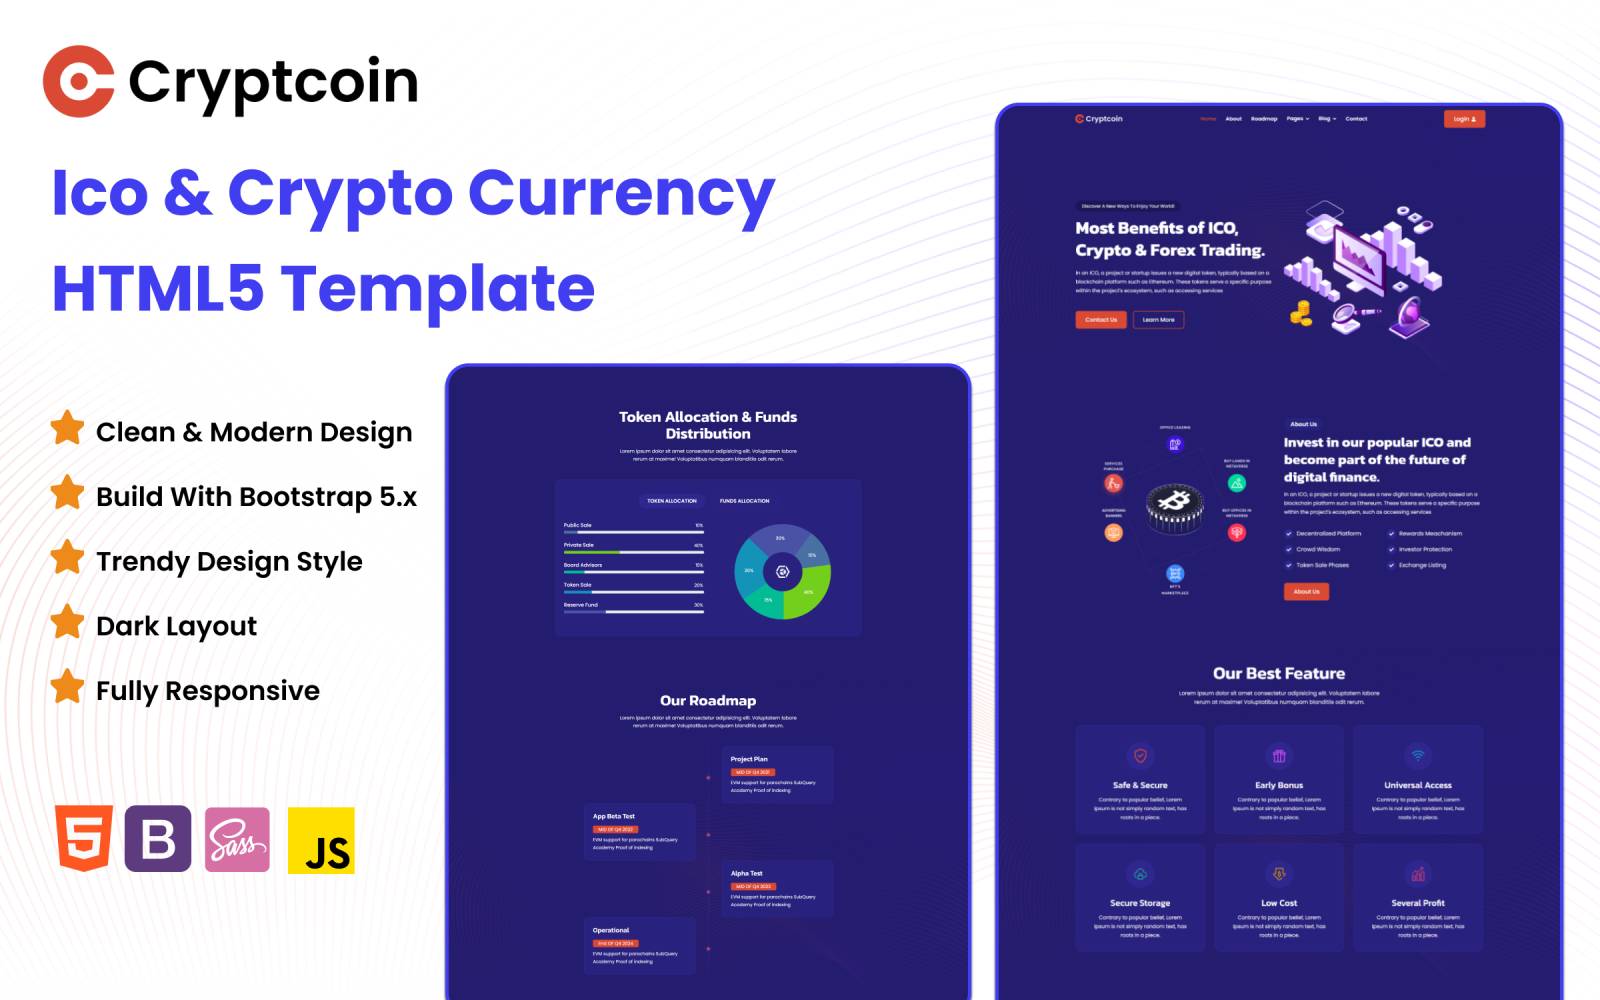 Cryptcoin - Ico & Crypto Currency Html Template